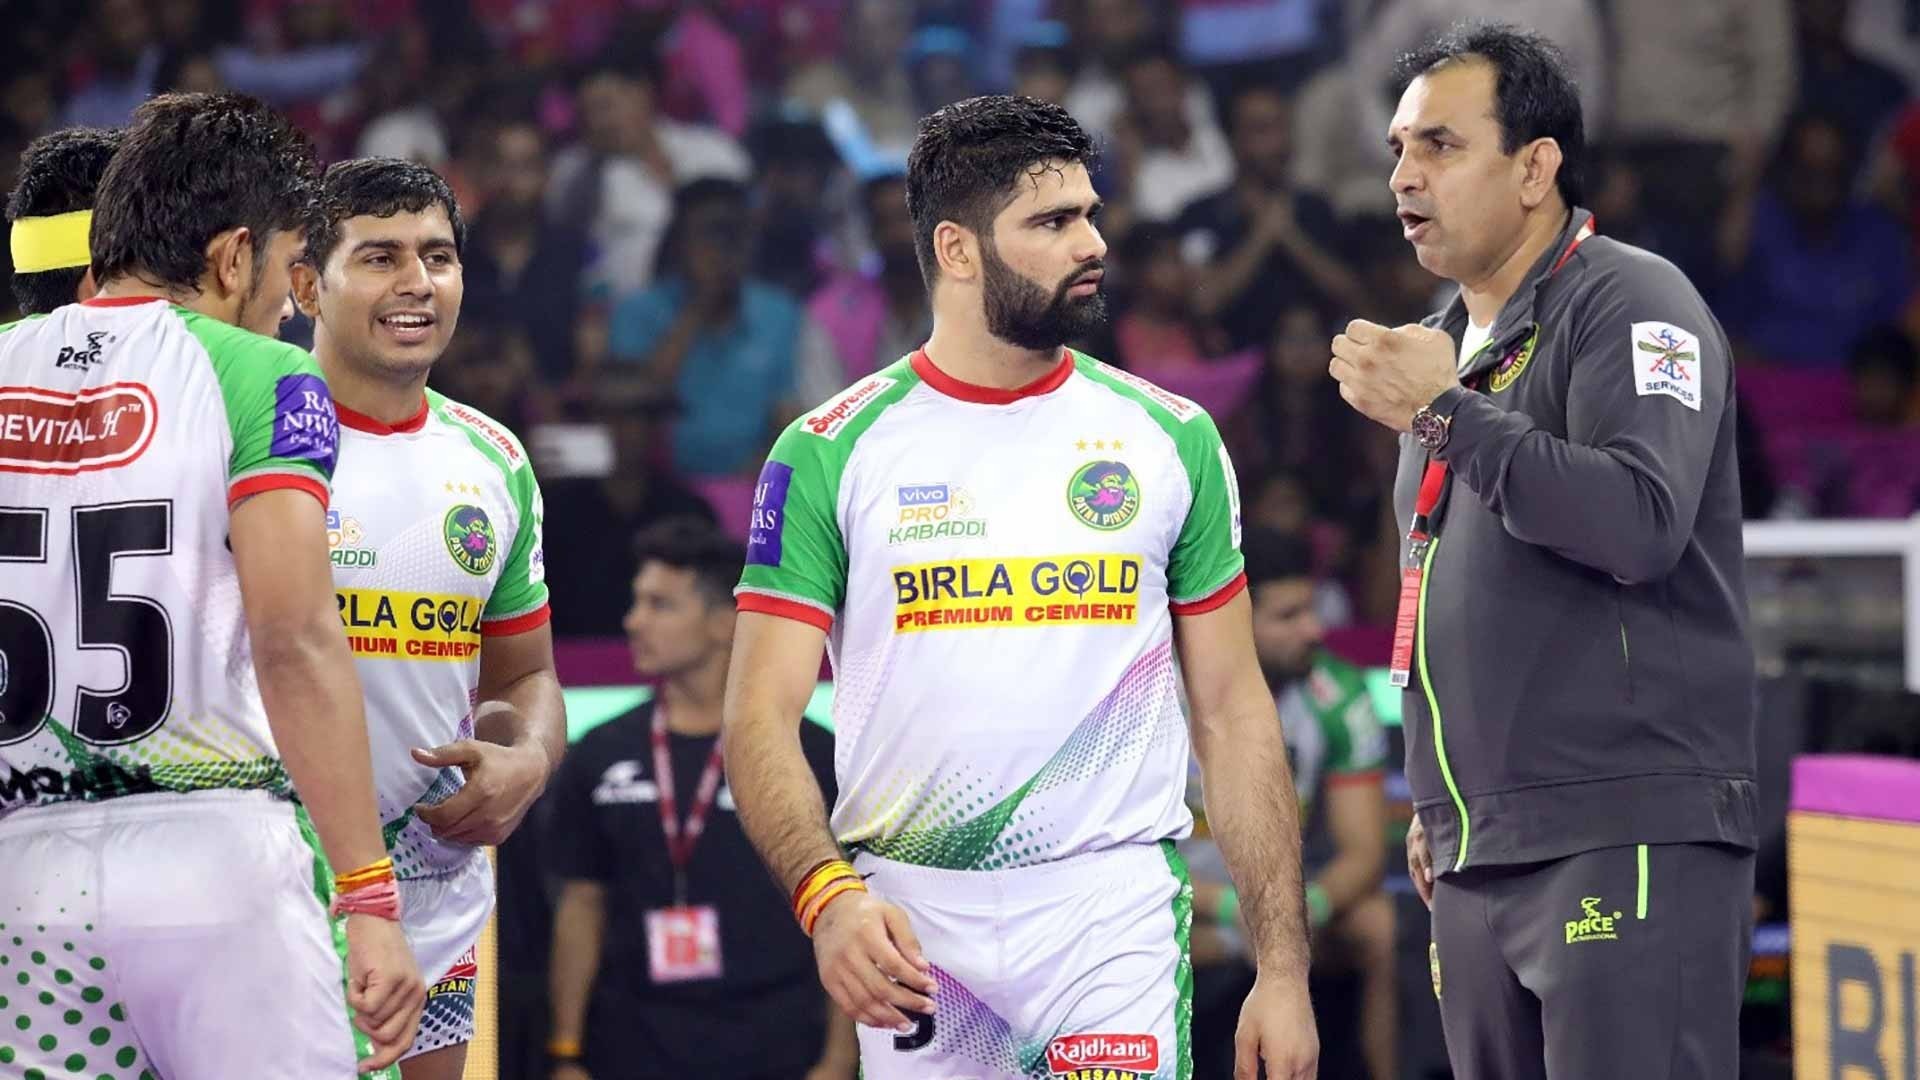 2021 PKL Auction | Pardeep Narwal goes to UP Yoddha for record-breaking 1.65 crore fee